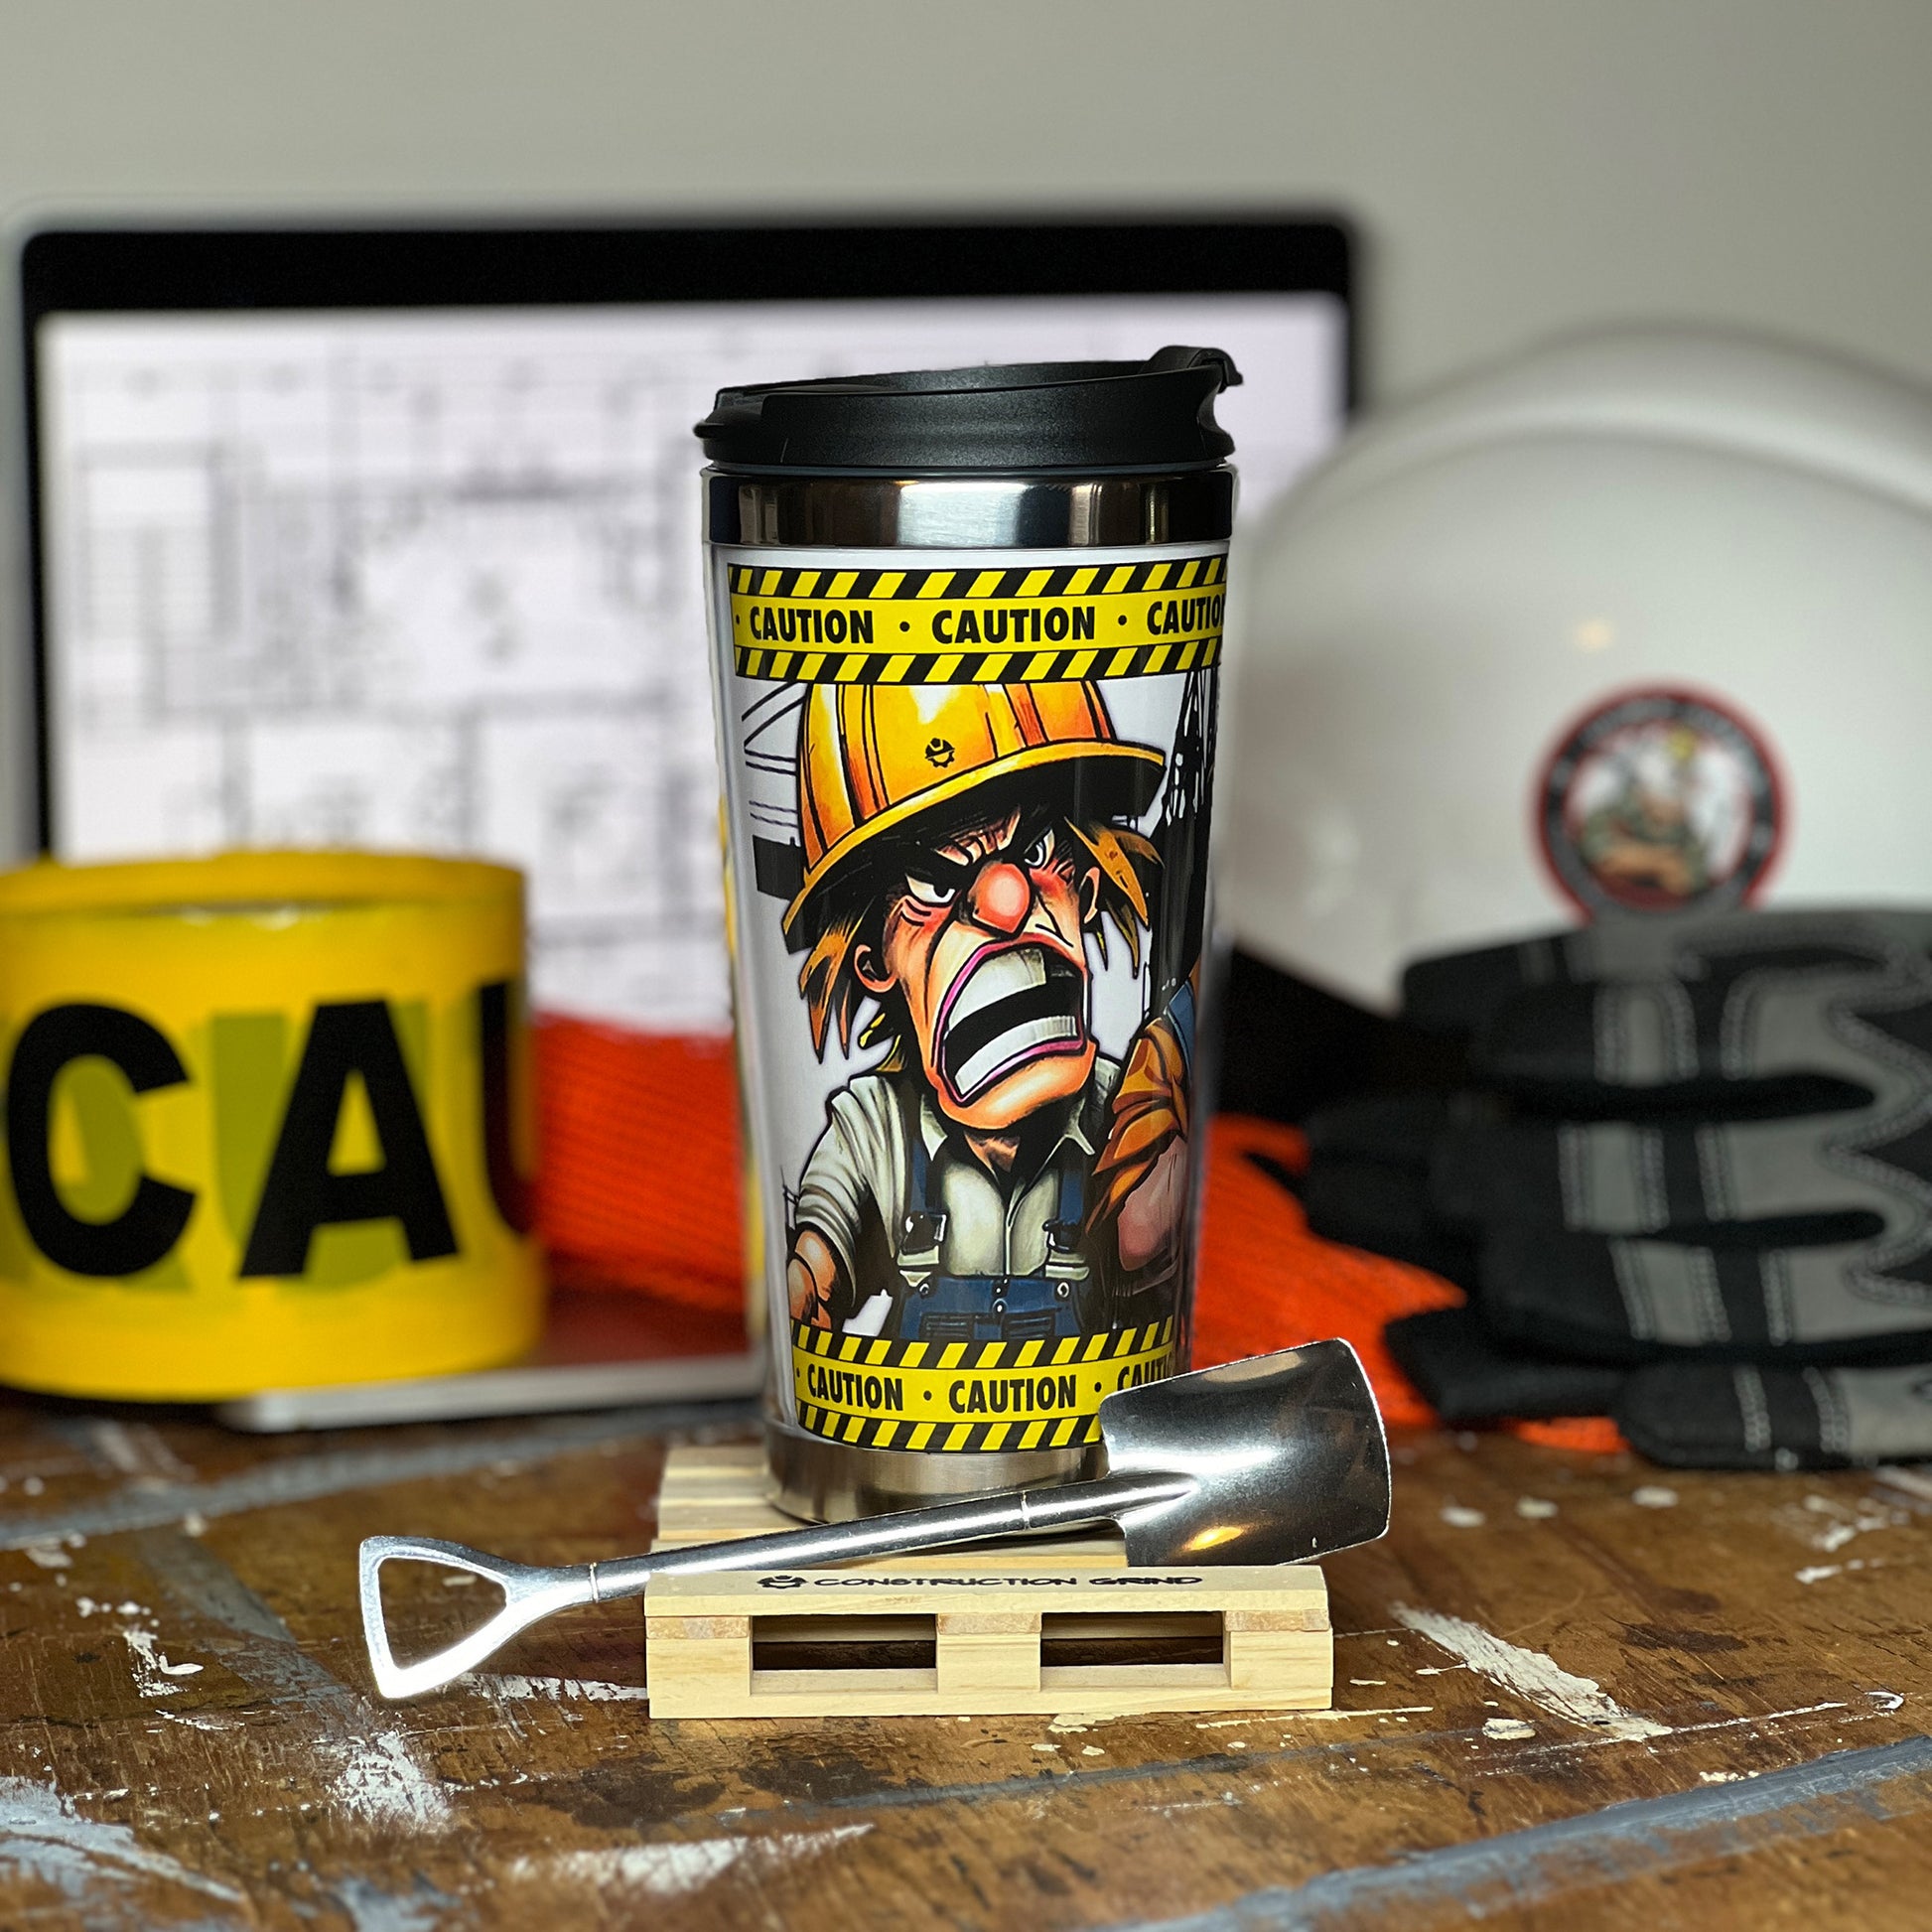 Construction Grind's "Meet the Crew" Second Shift 12 oz. coffee tumbler sitting on a 4" wooden pallet coaster with a stainless-steel shovel spoon. Showing our Site Superintendent, "Jack", one of three crew members shown on the tumbler.